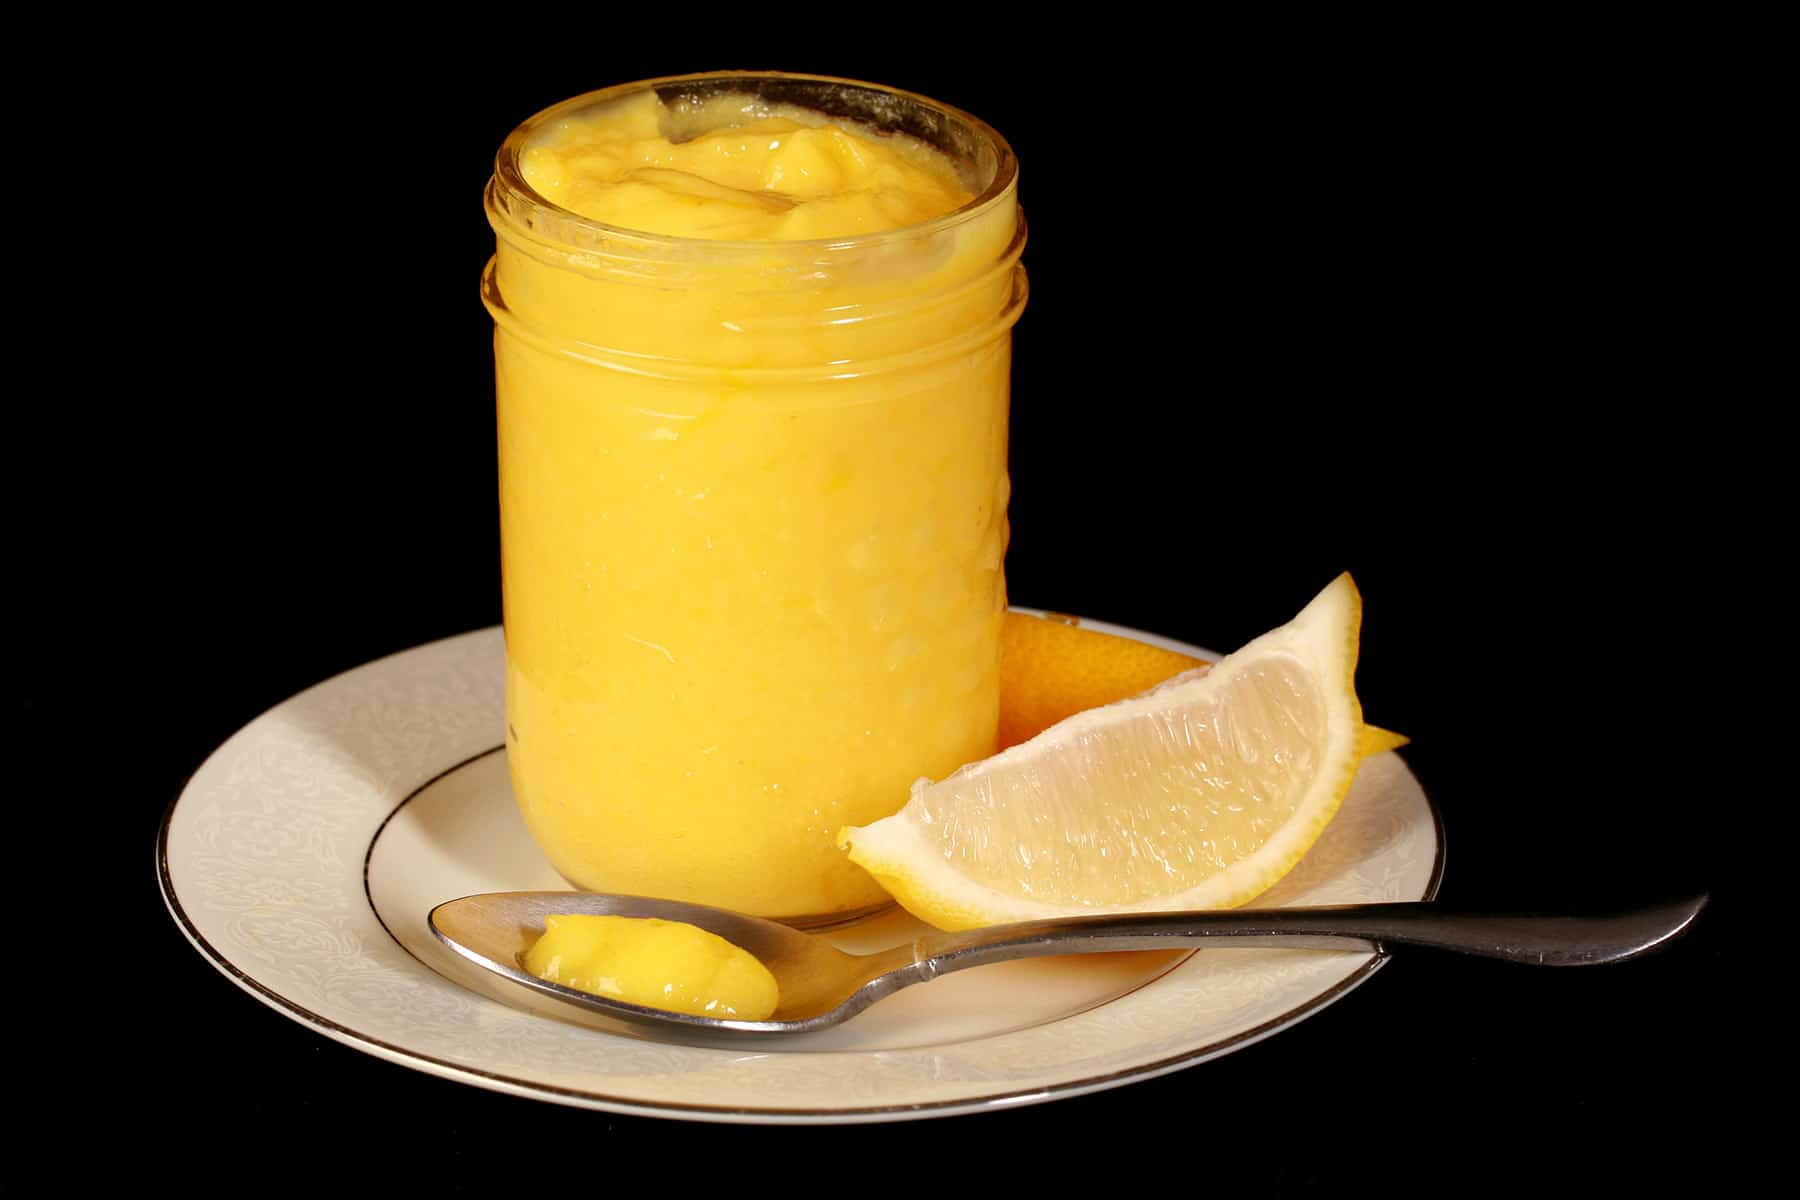 A jam jar of lemon curd on a plate, along with lemon slices and a spoon of curd.